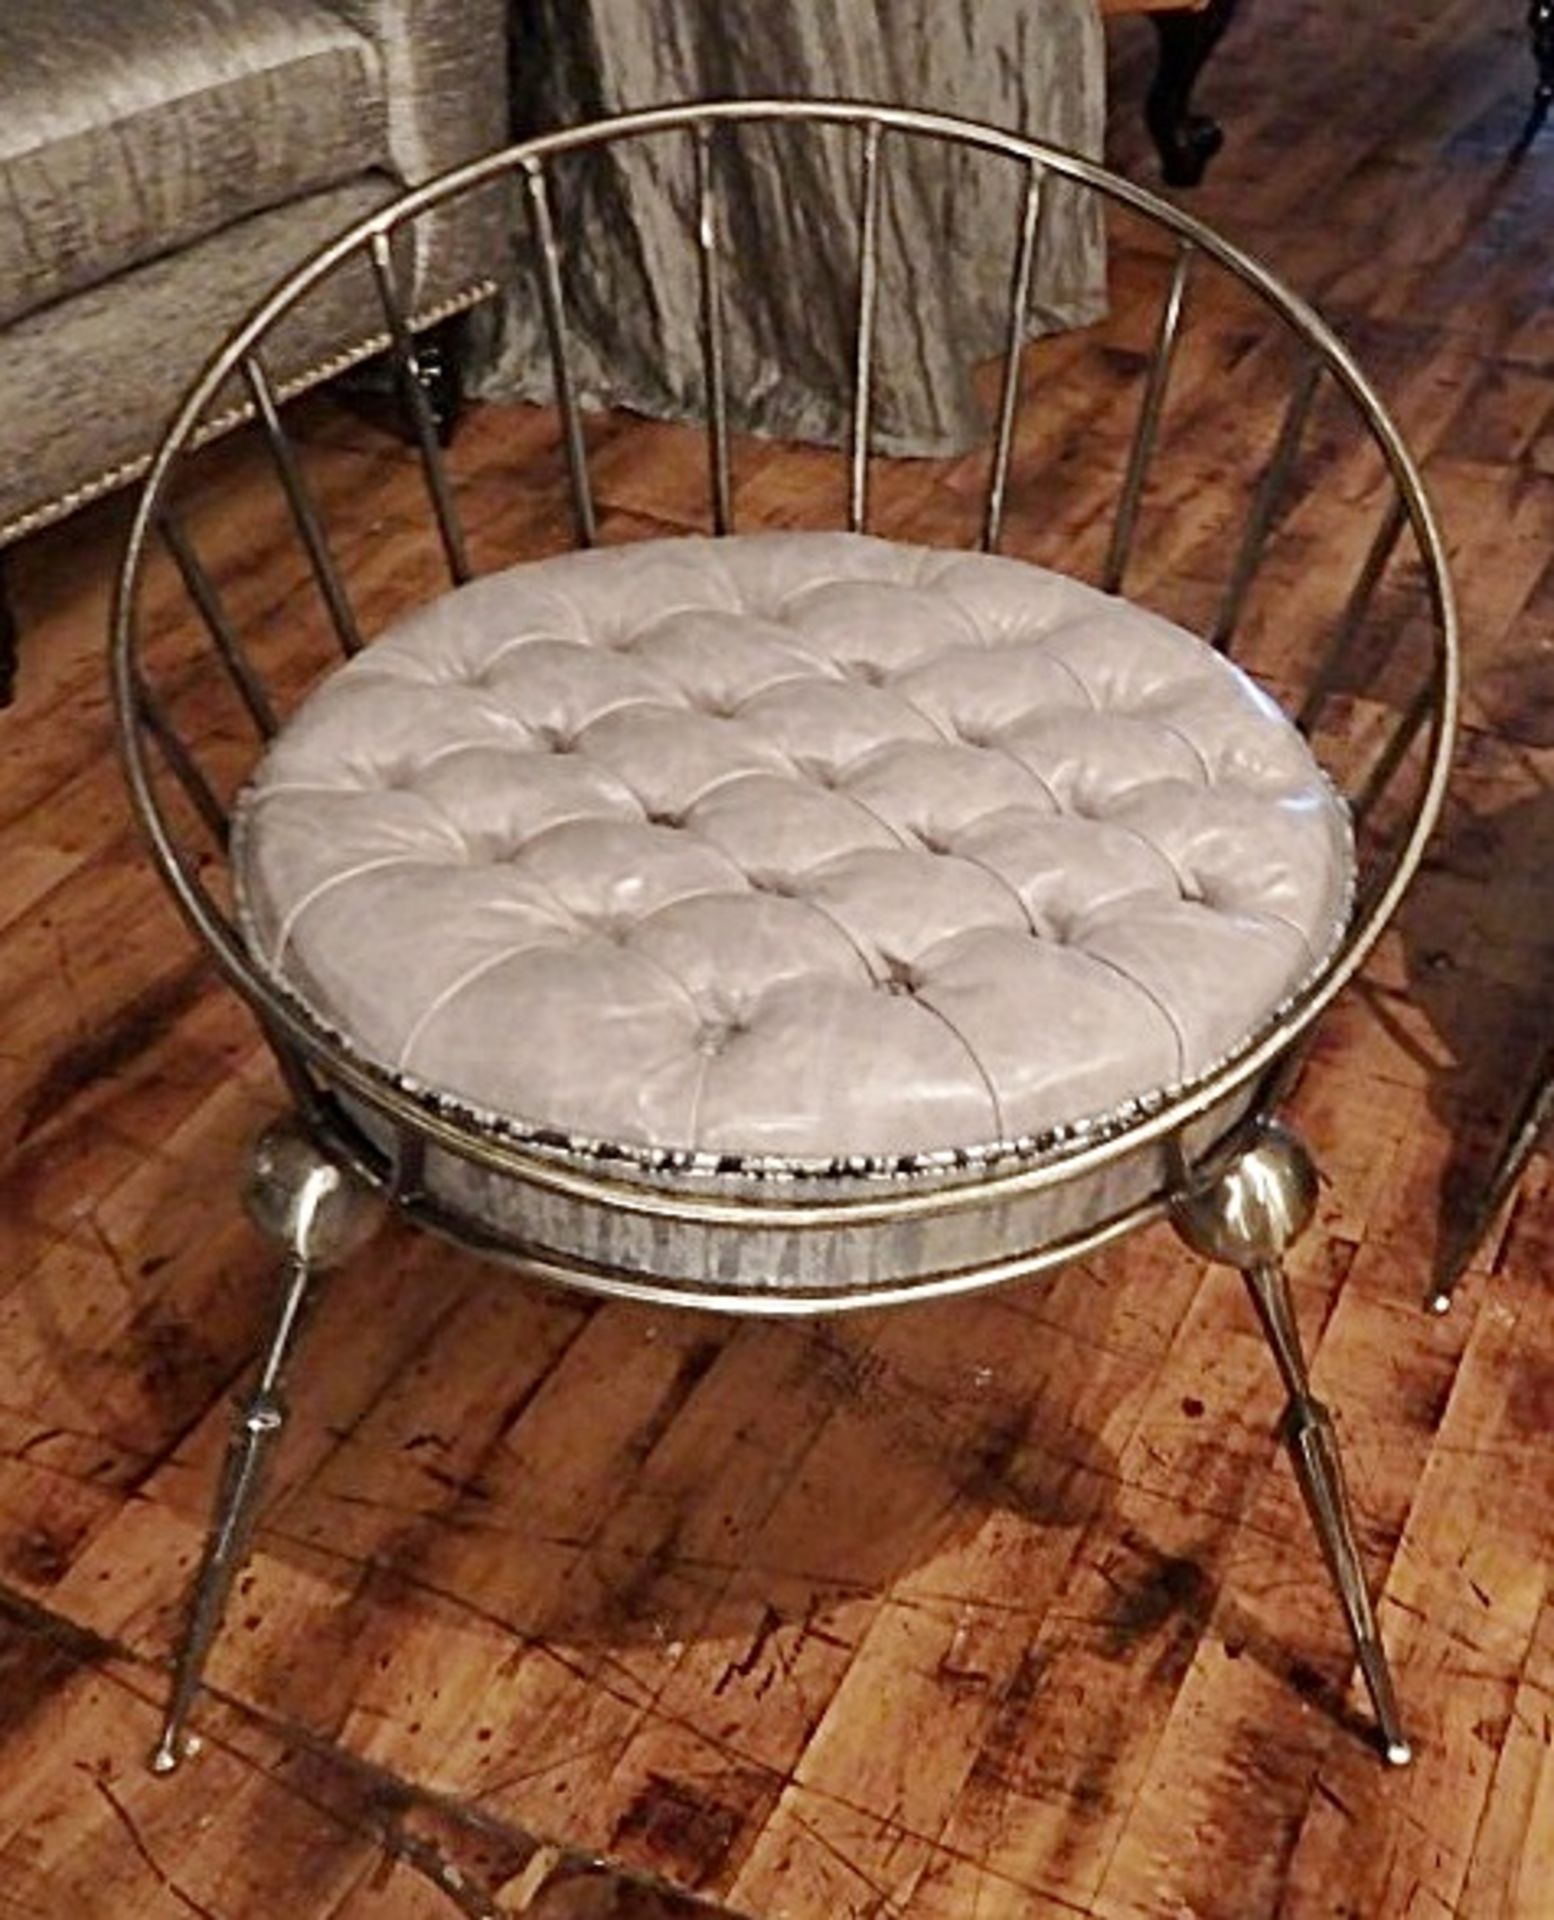 1 x Bespoke Handcrafted Chair - Unique Metal Framework With Leather Upholstered Cushion  - Colour: